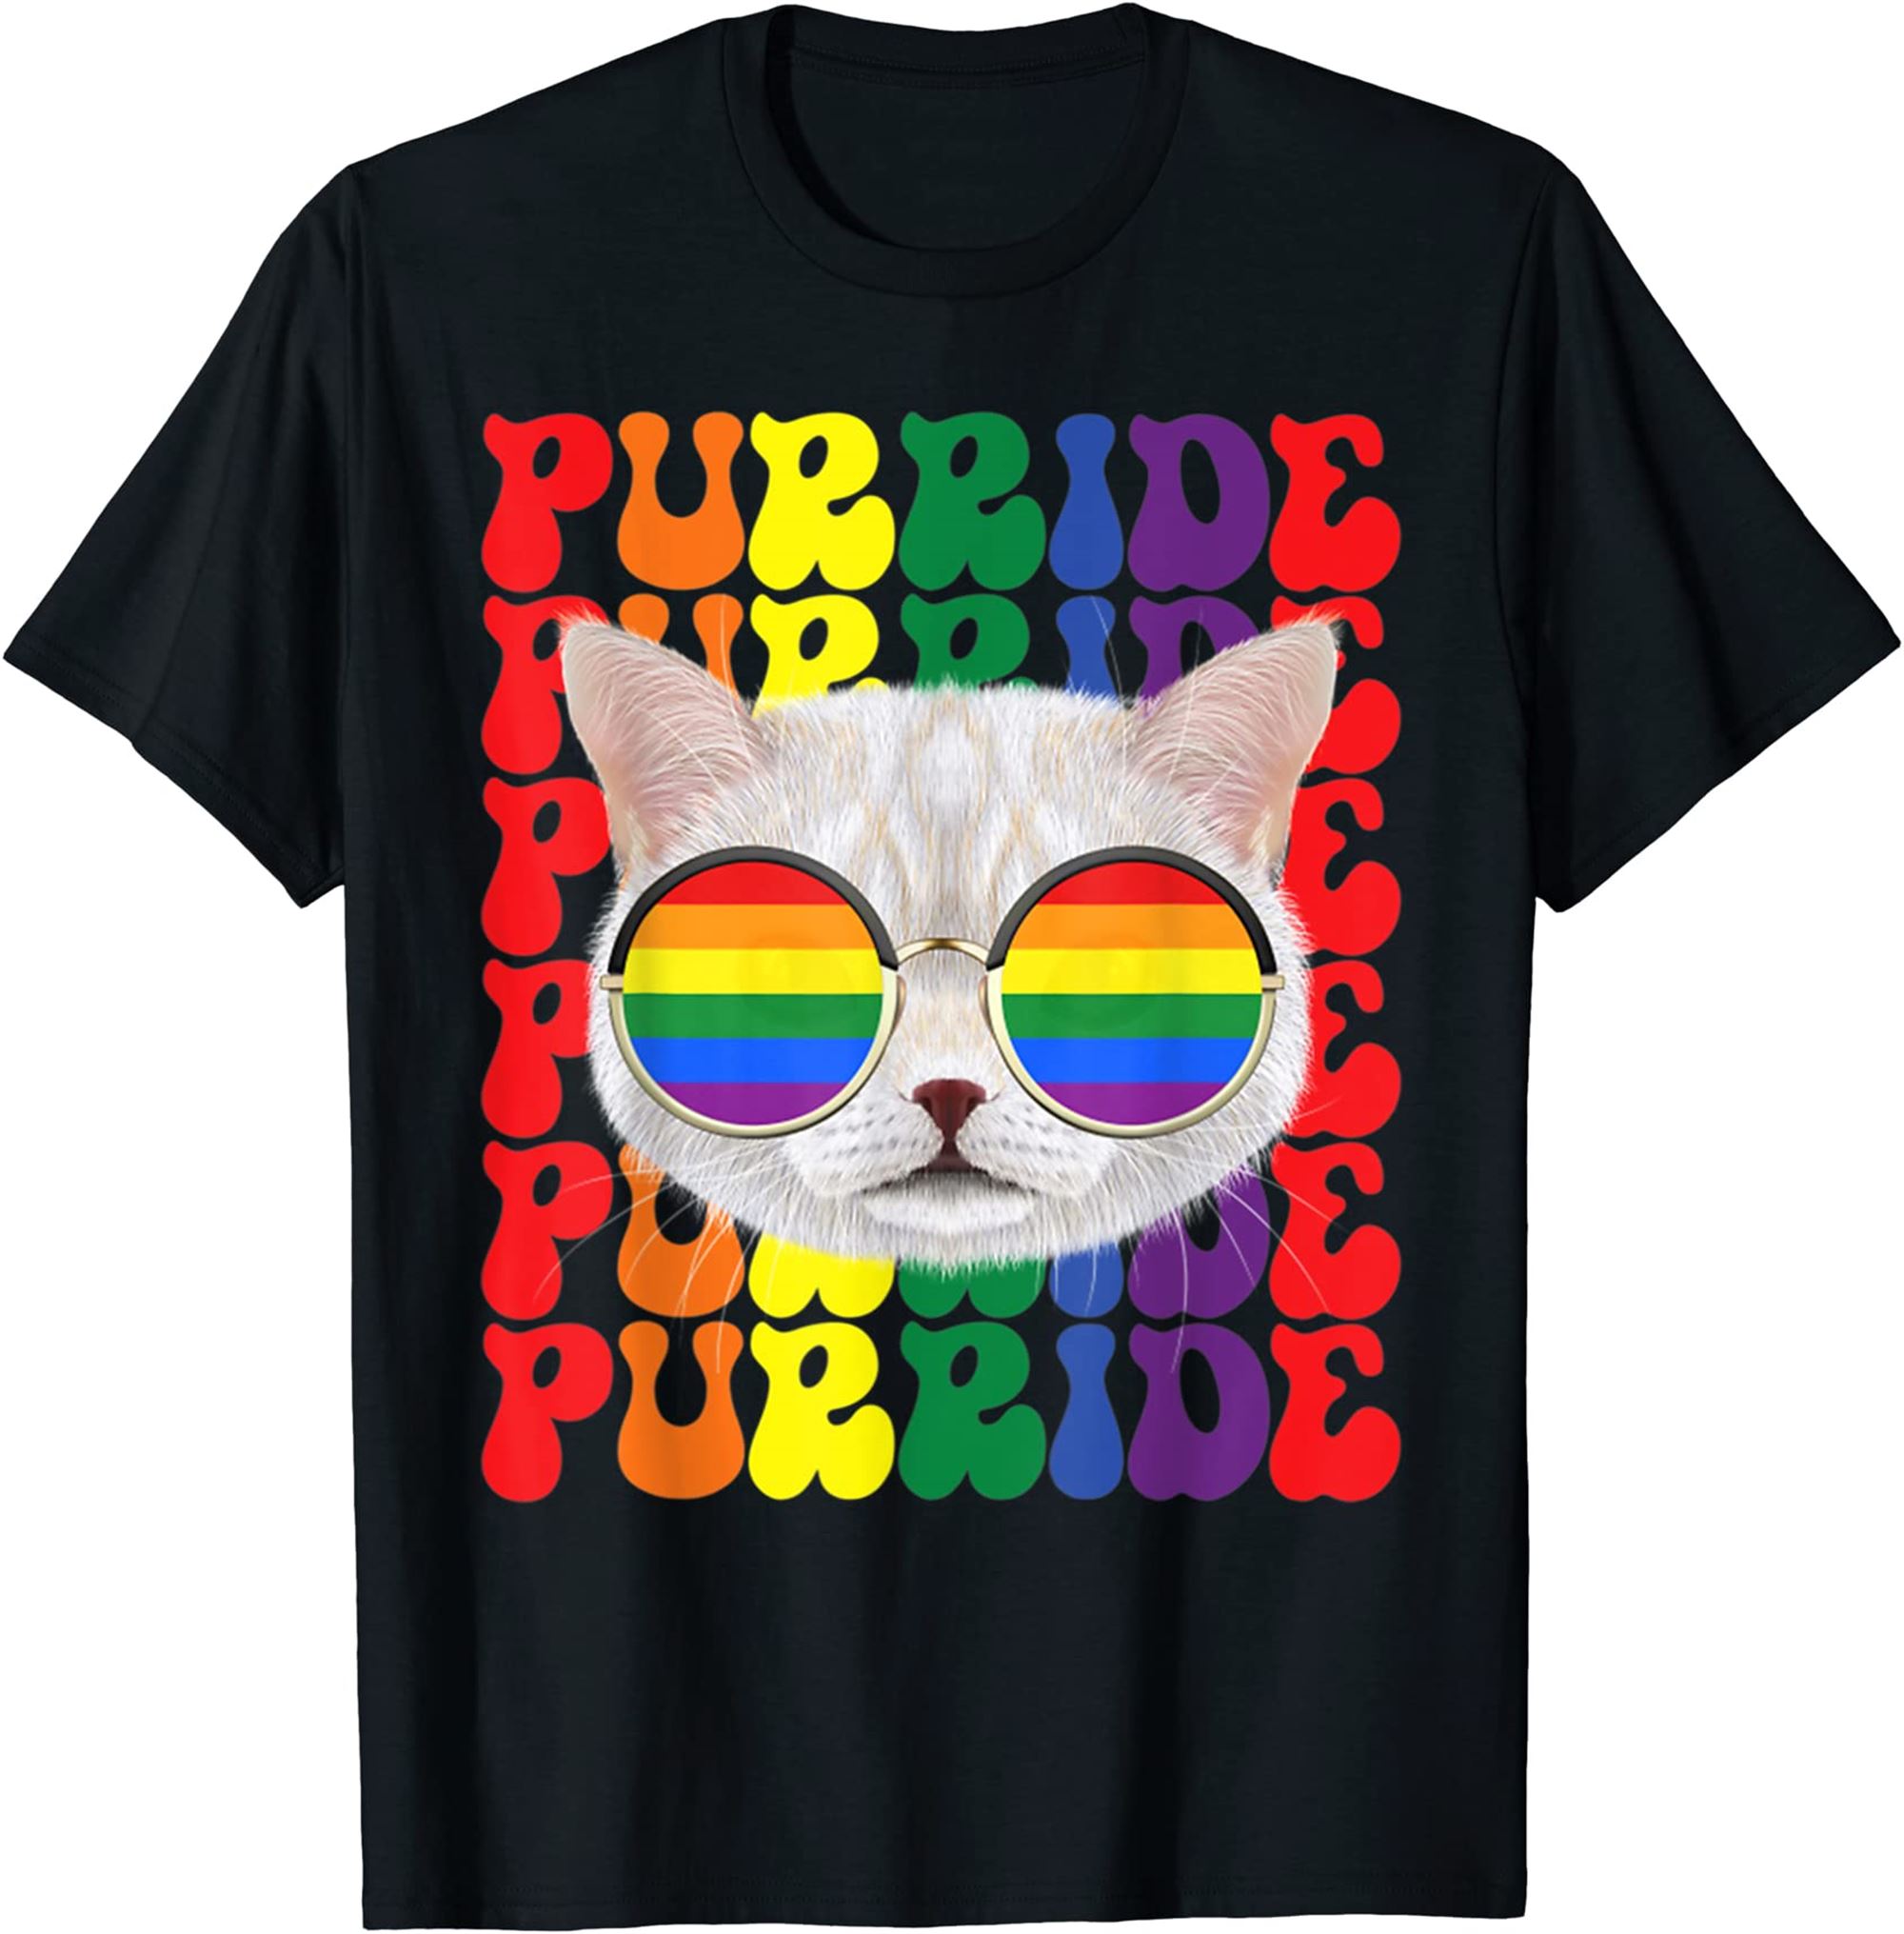 Purride Cat Lgbt Cute Gifts For Pride Ally Pride Month T-shirt Size Up To 5xl